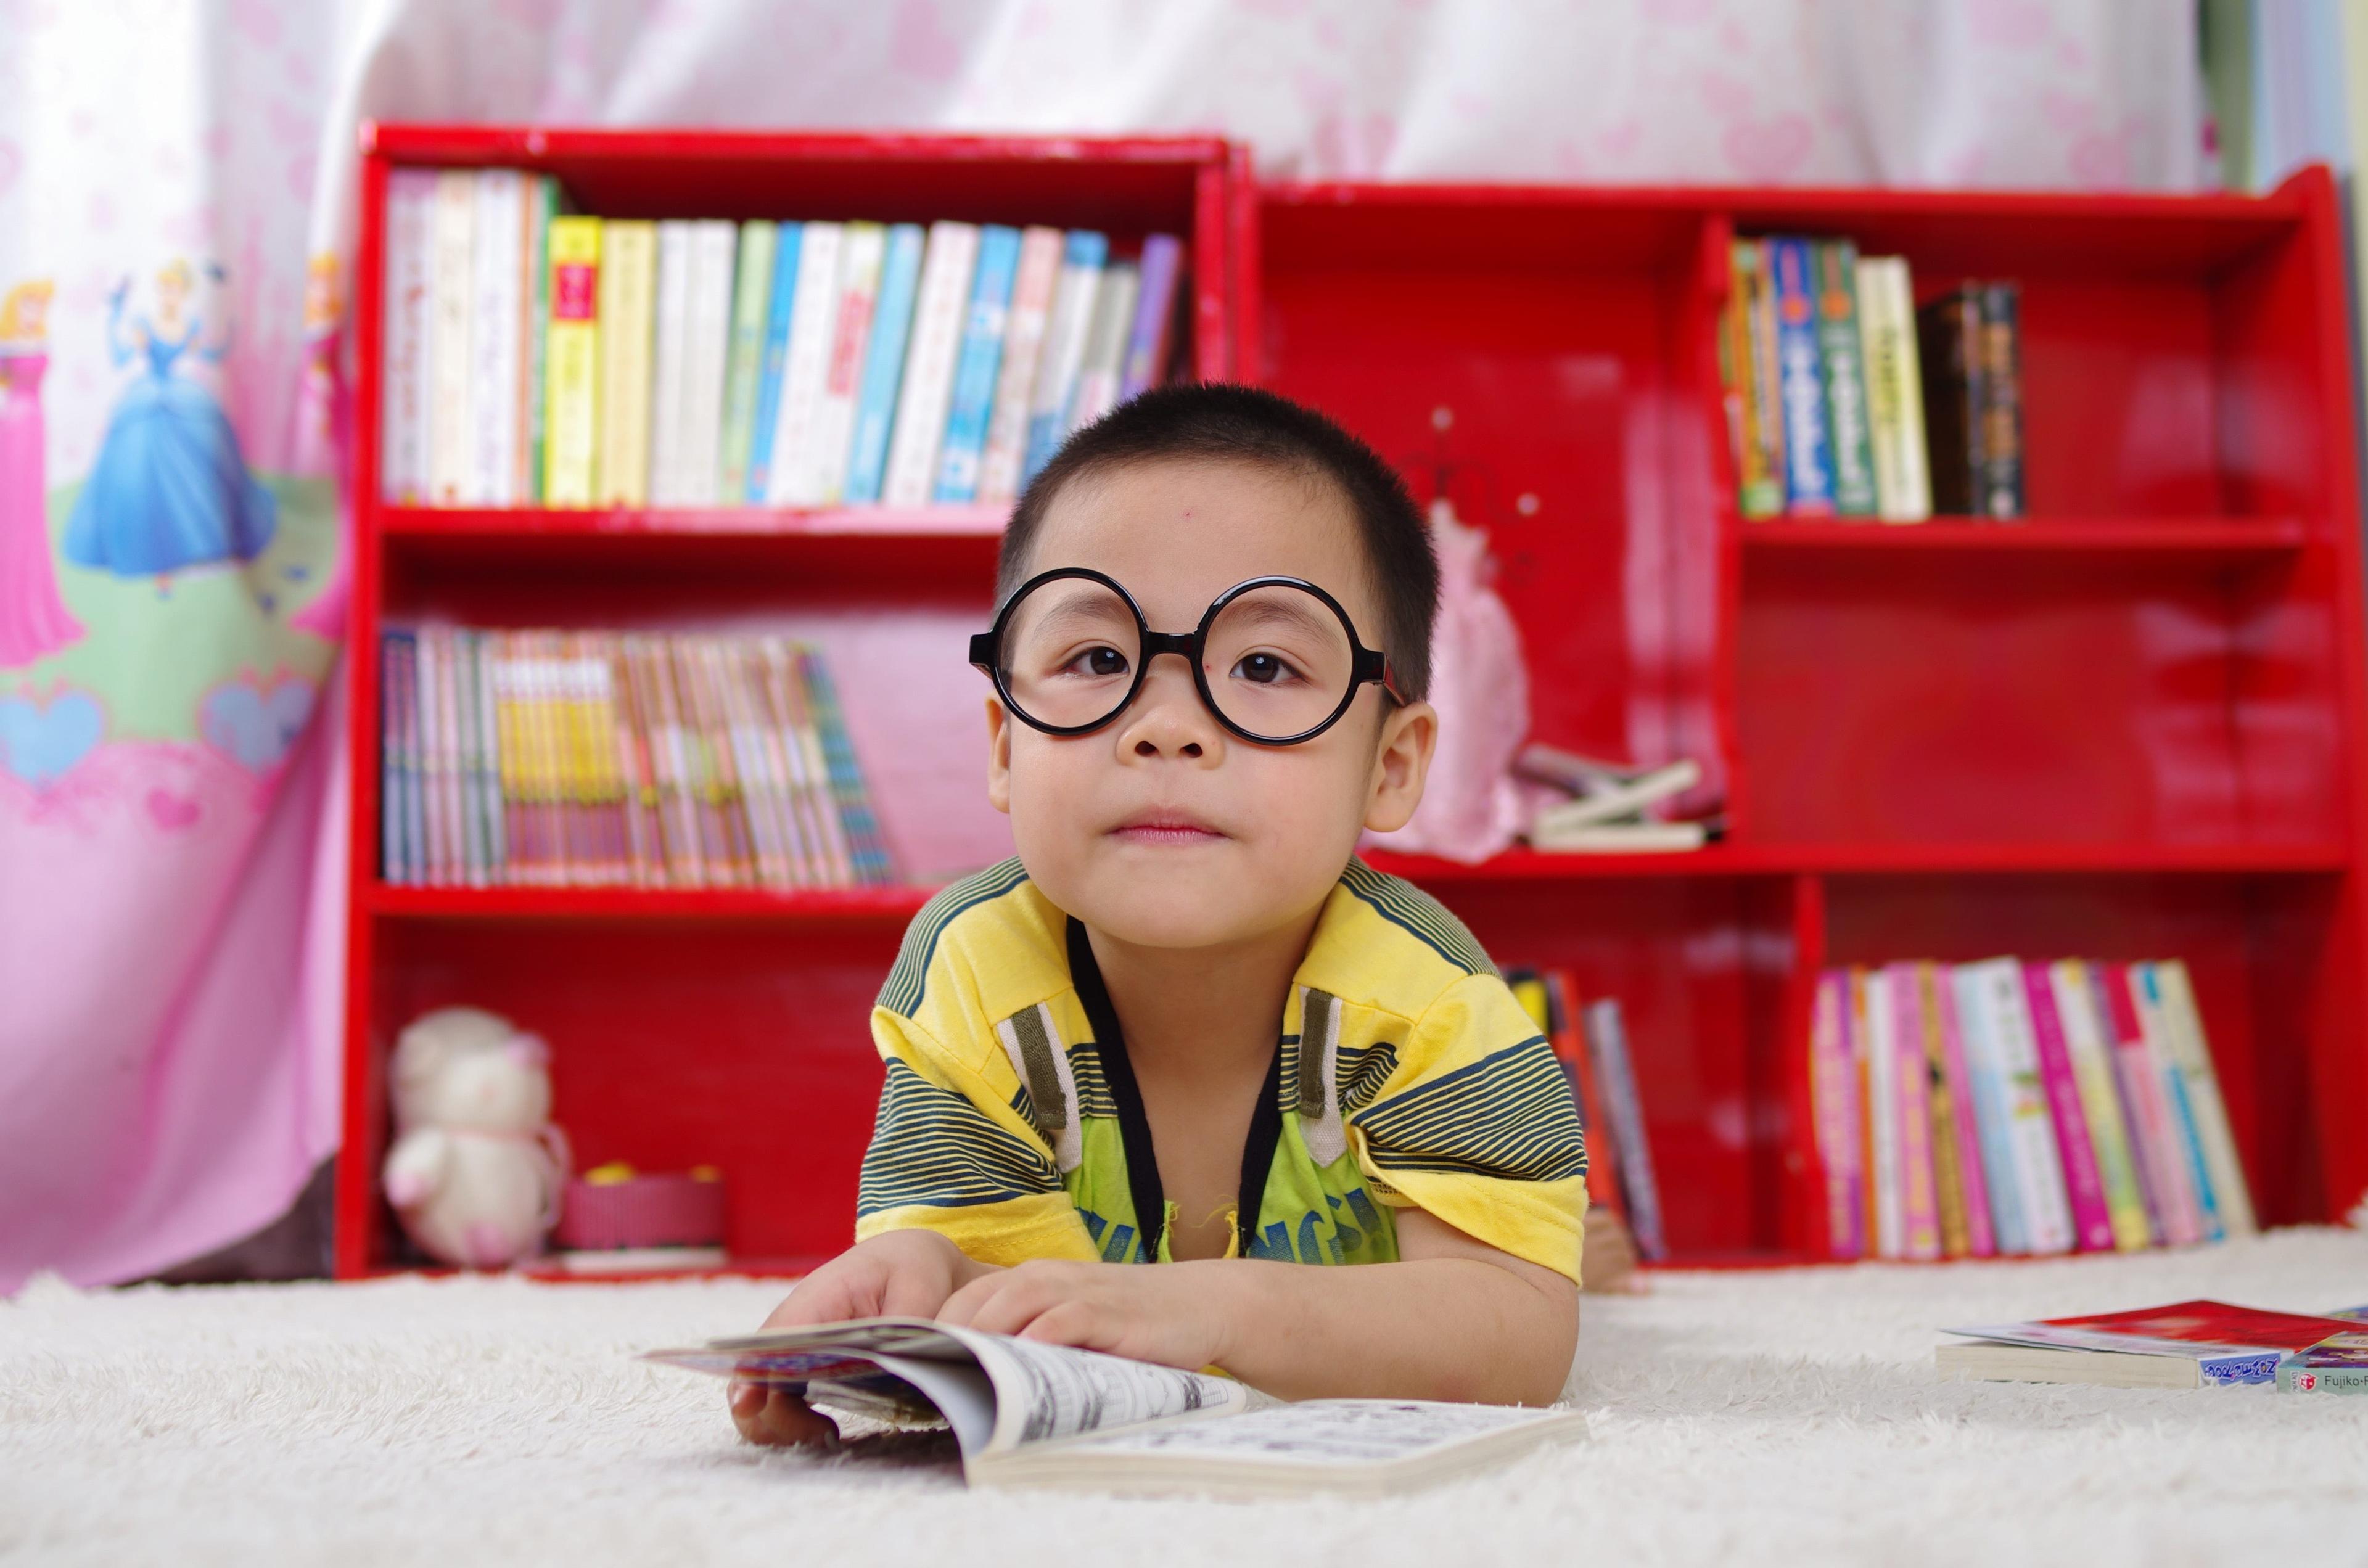 A young boy wit glasses reads a book